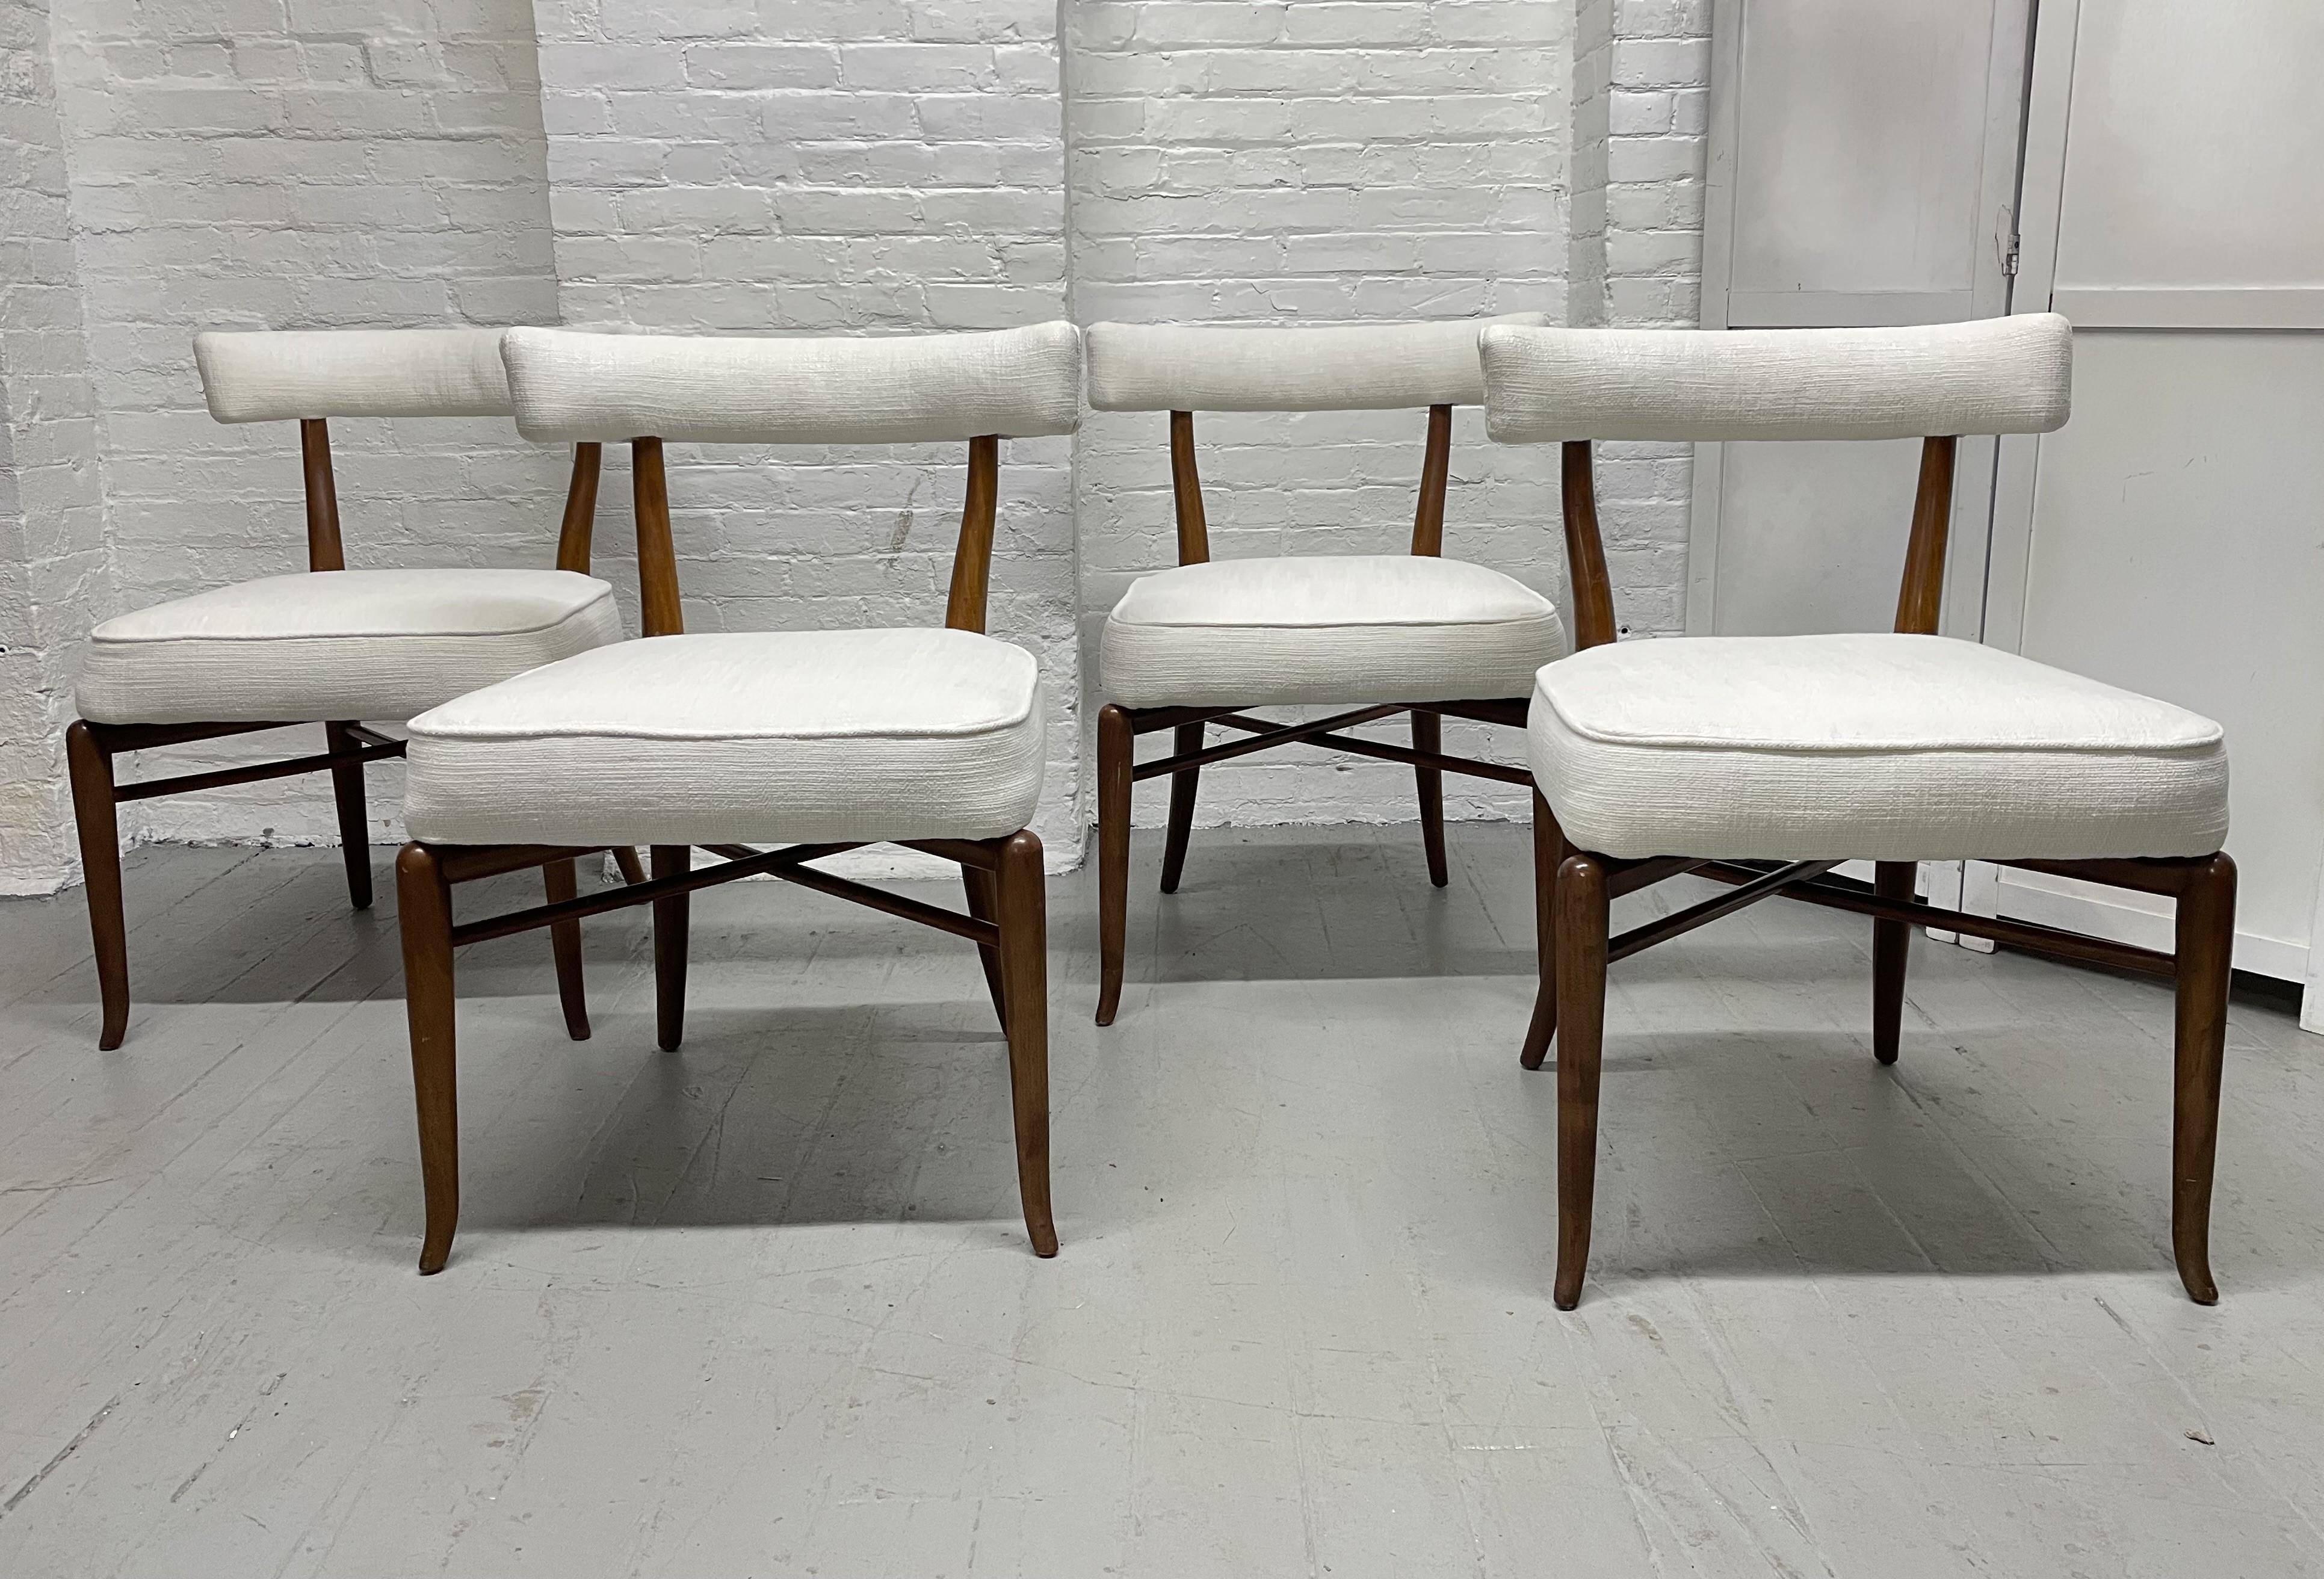 Set of 4 T.H. Robsjohn-Gibbings Klismos chairs with sculptural walnut frames, double stretcher bases and newly upholstered.